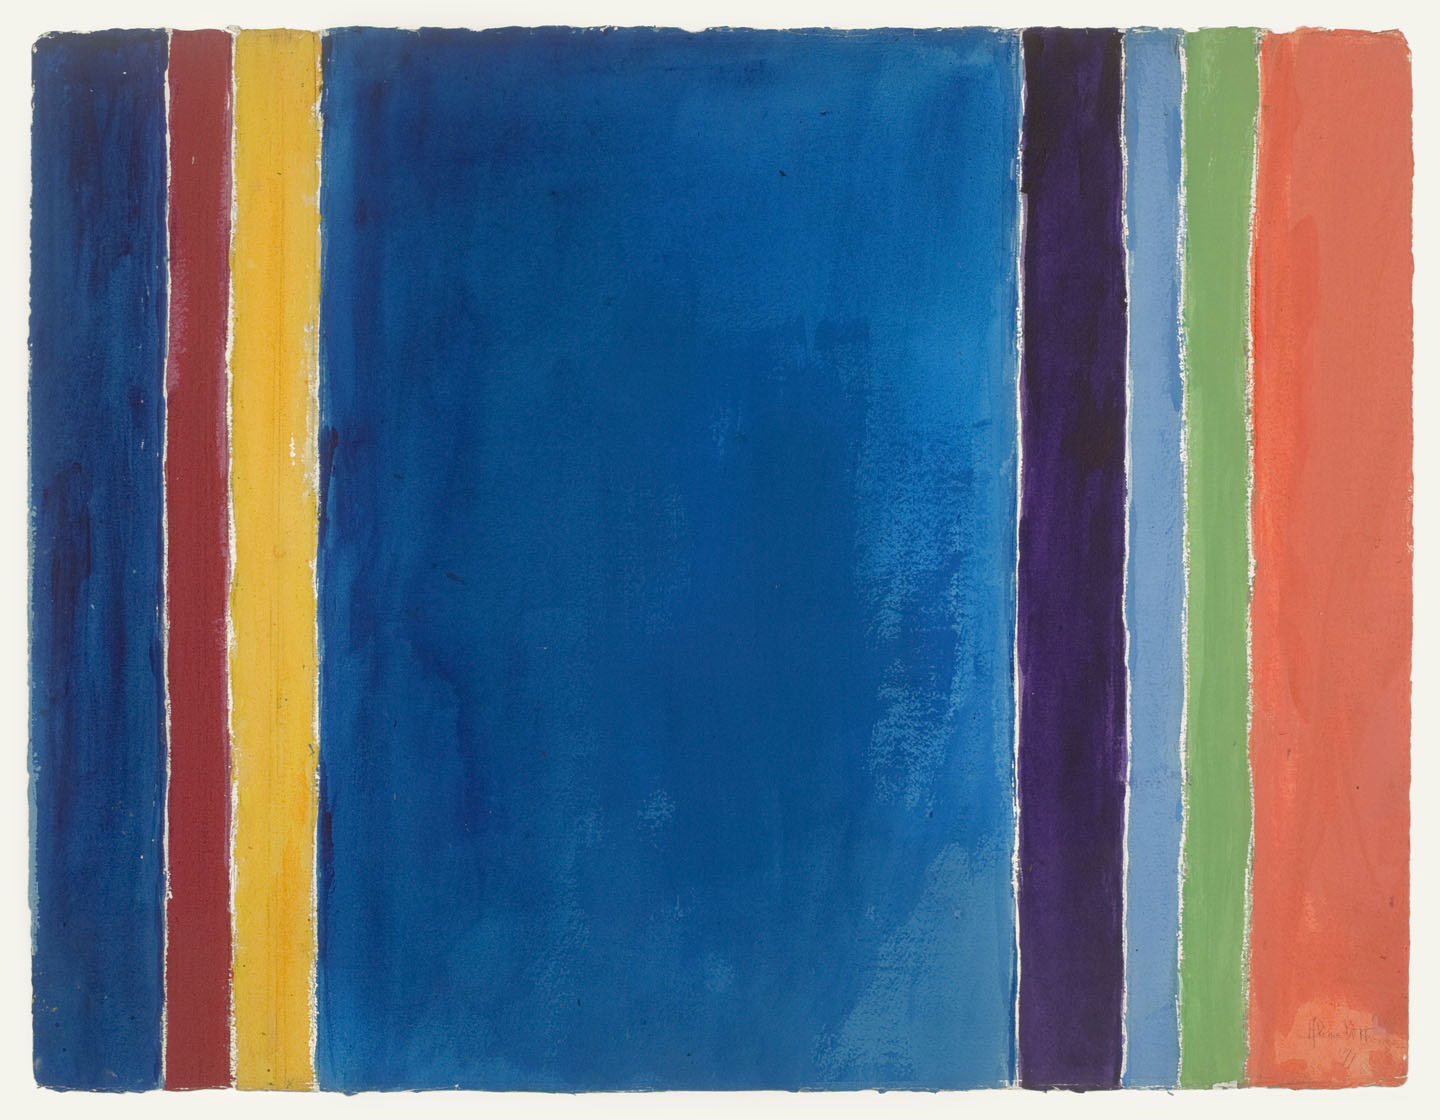 Several stripes in blue, red, yellow, green, orange, and purple are painted next to each other. In the middle, a blue strip dominates the painting as it takes up the most space.